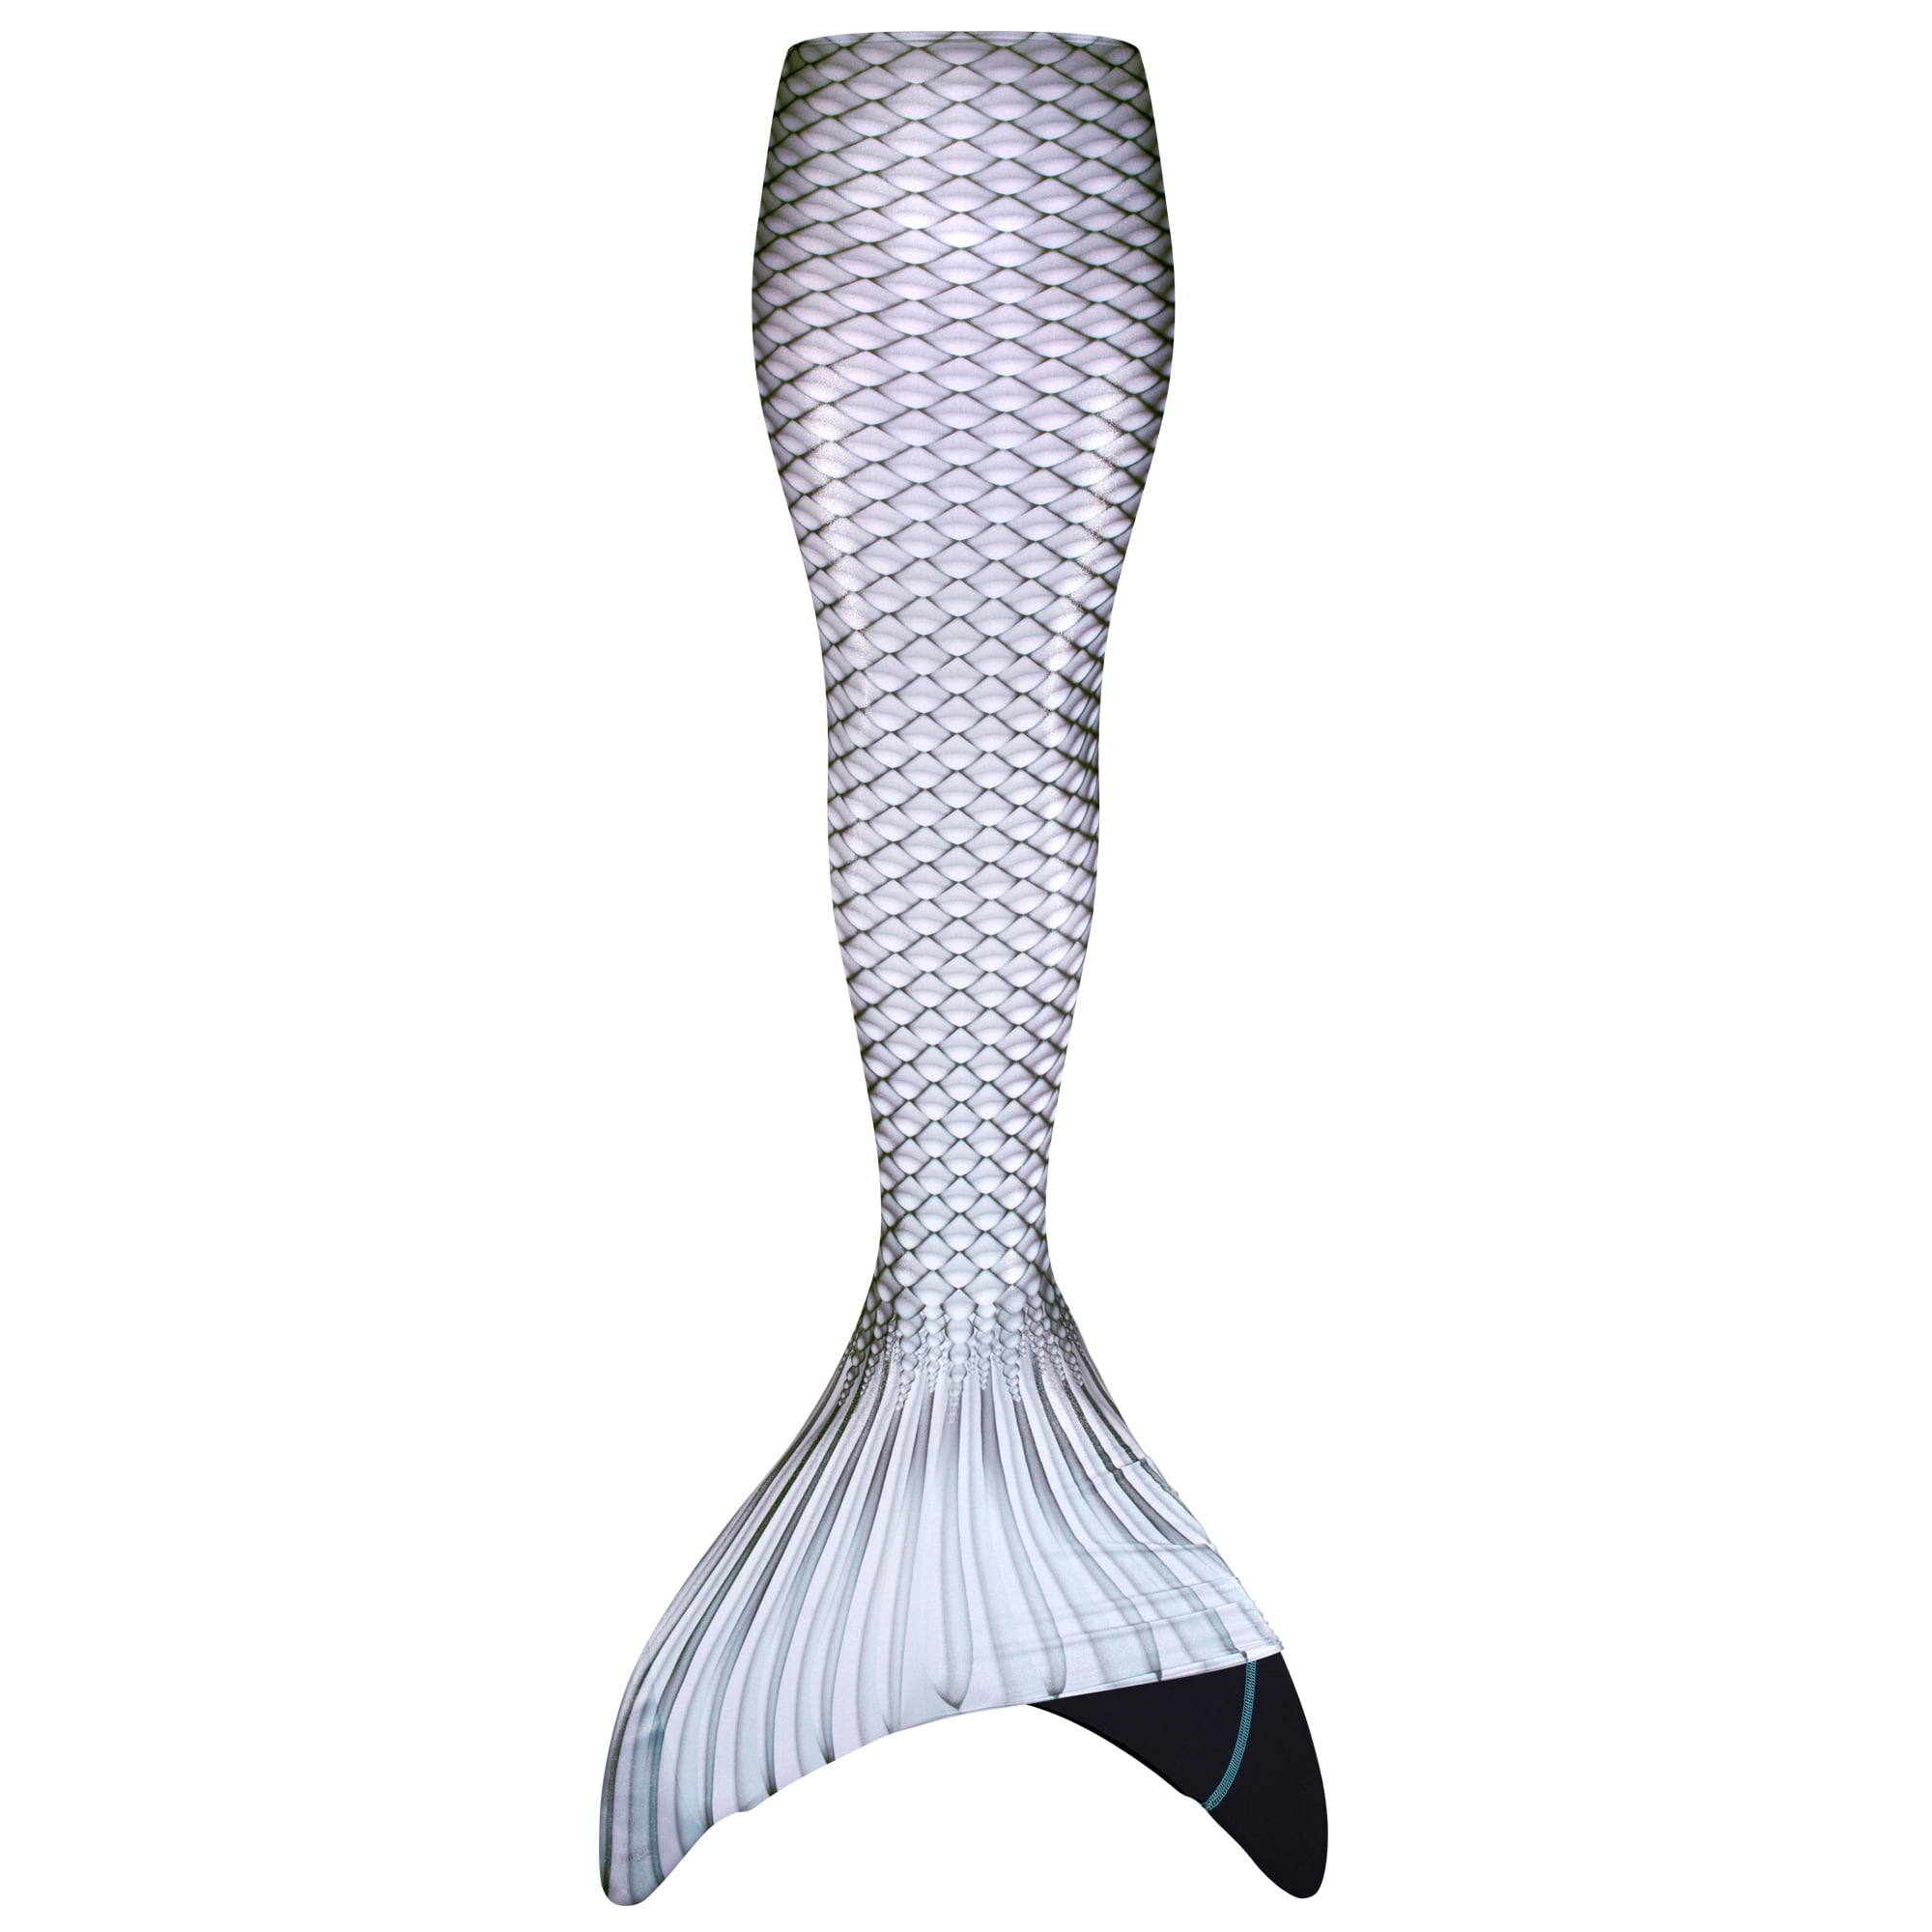 Limited Fin Fun Mermaid Tails Swimming Monofin Kid Adult Sizes 